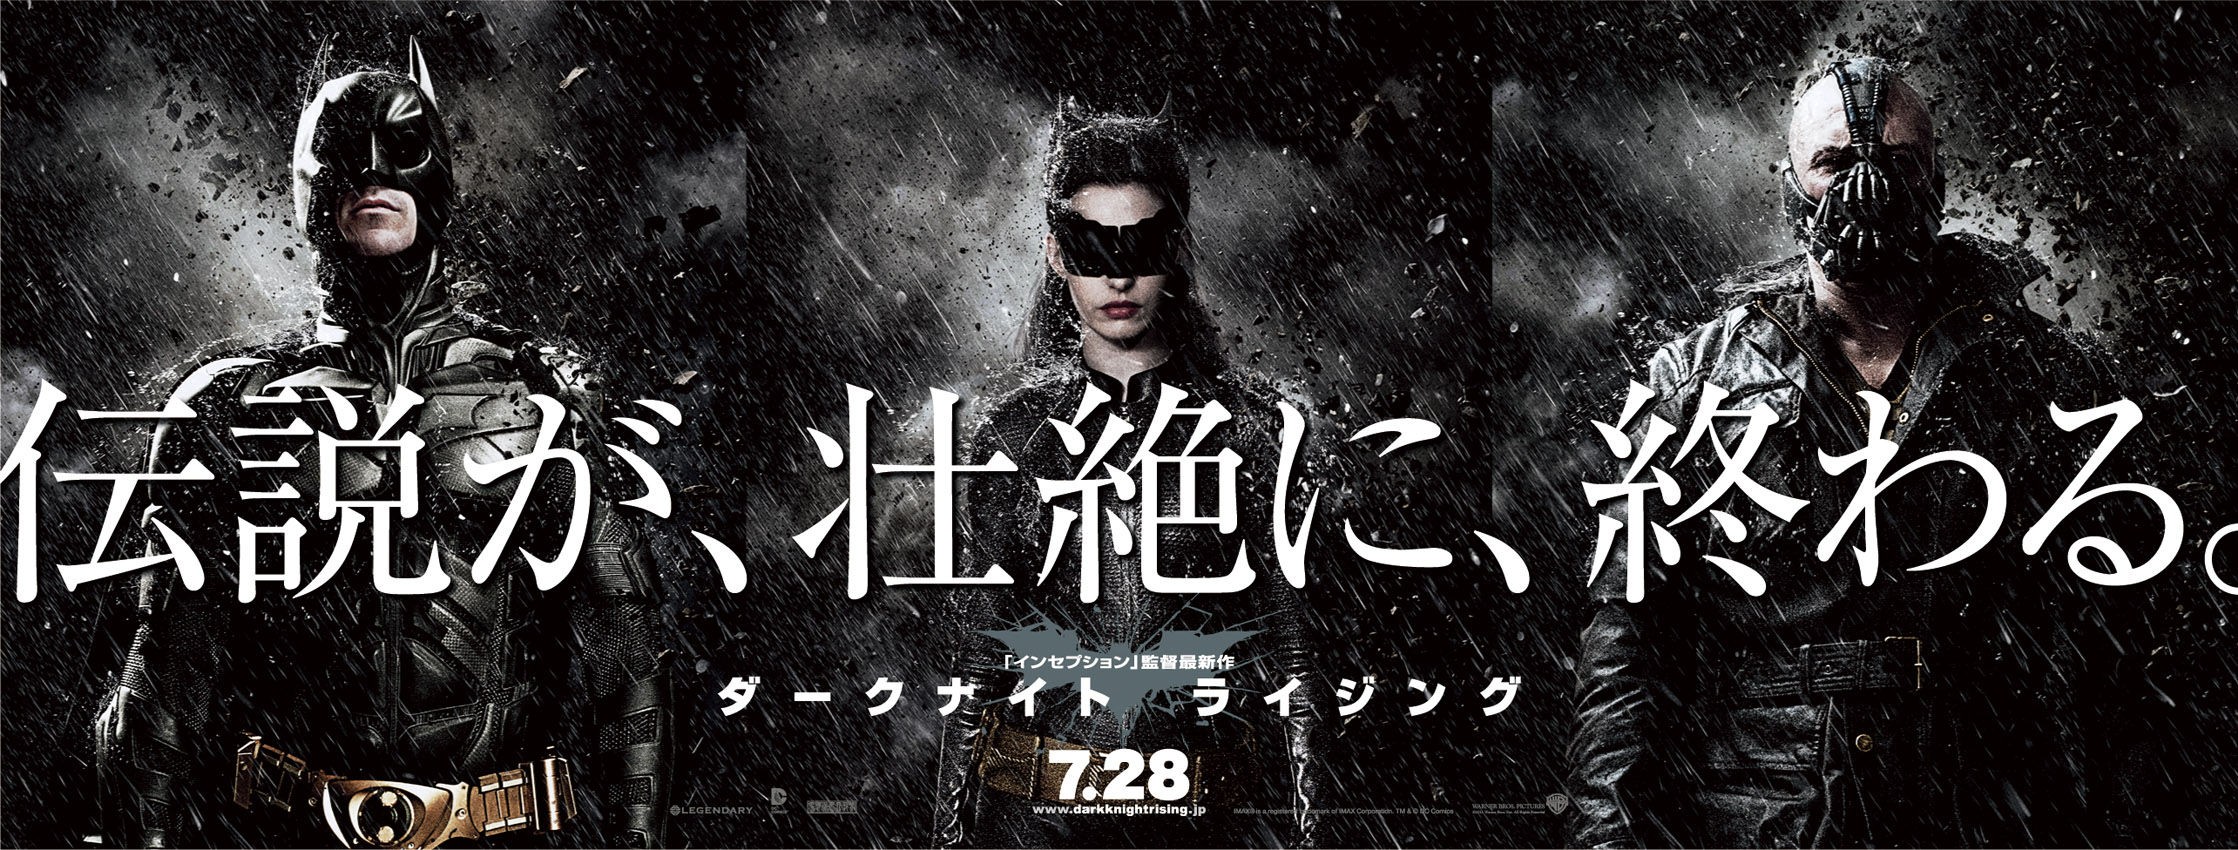 Mega Sized Movie Poster Image for The Dark Knight Rises (#24 of 24)